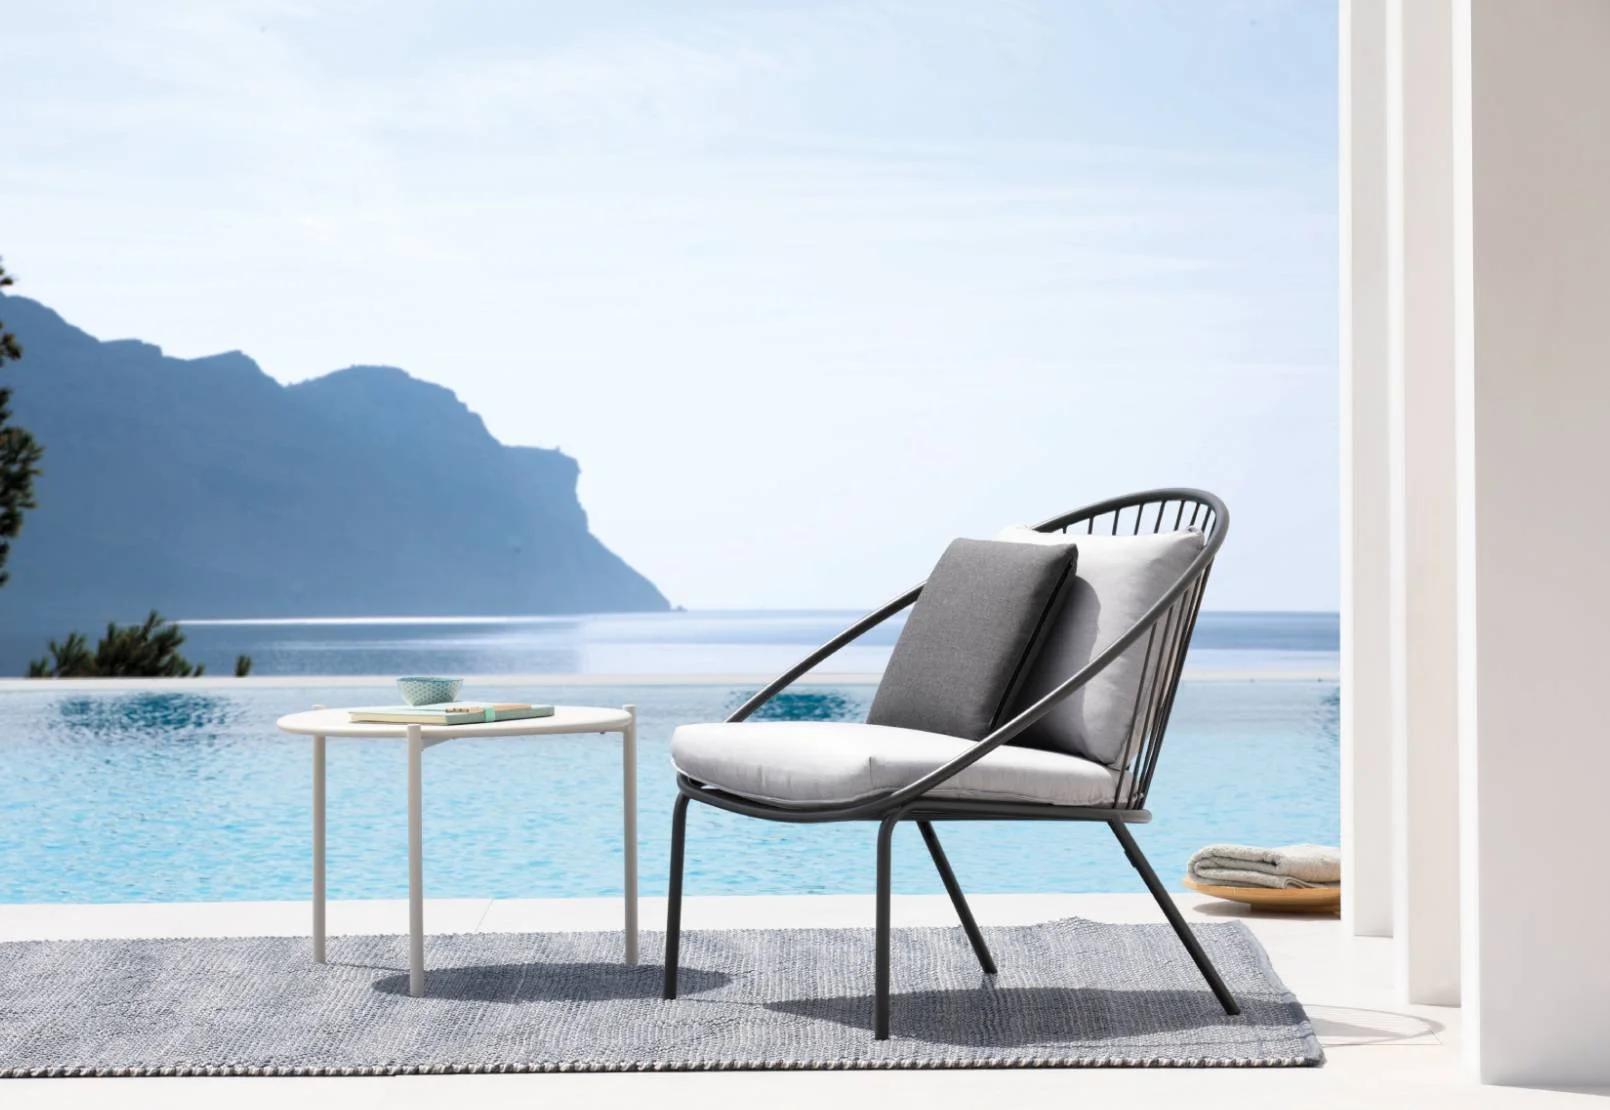 Explore The New Outdoor Collection At Chattels&More